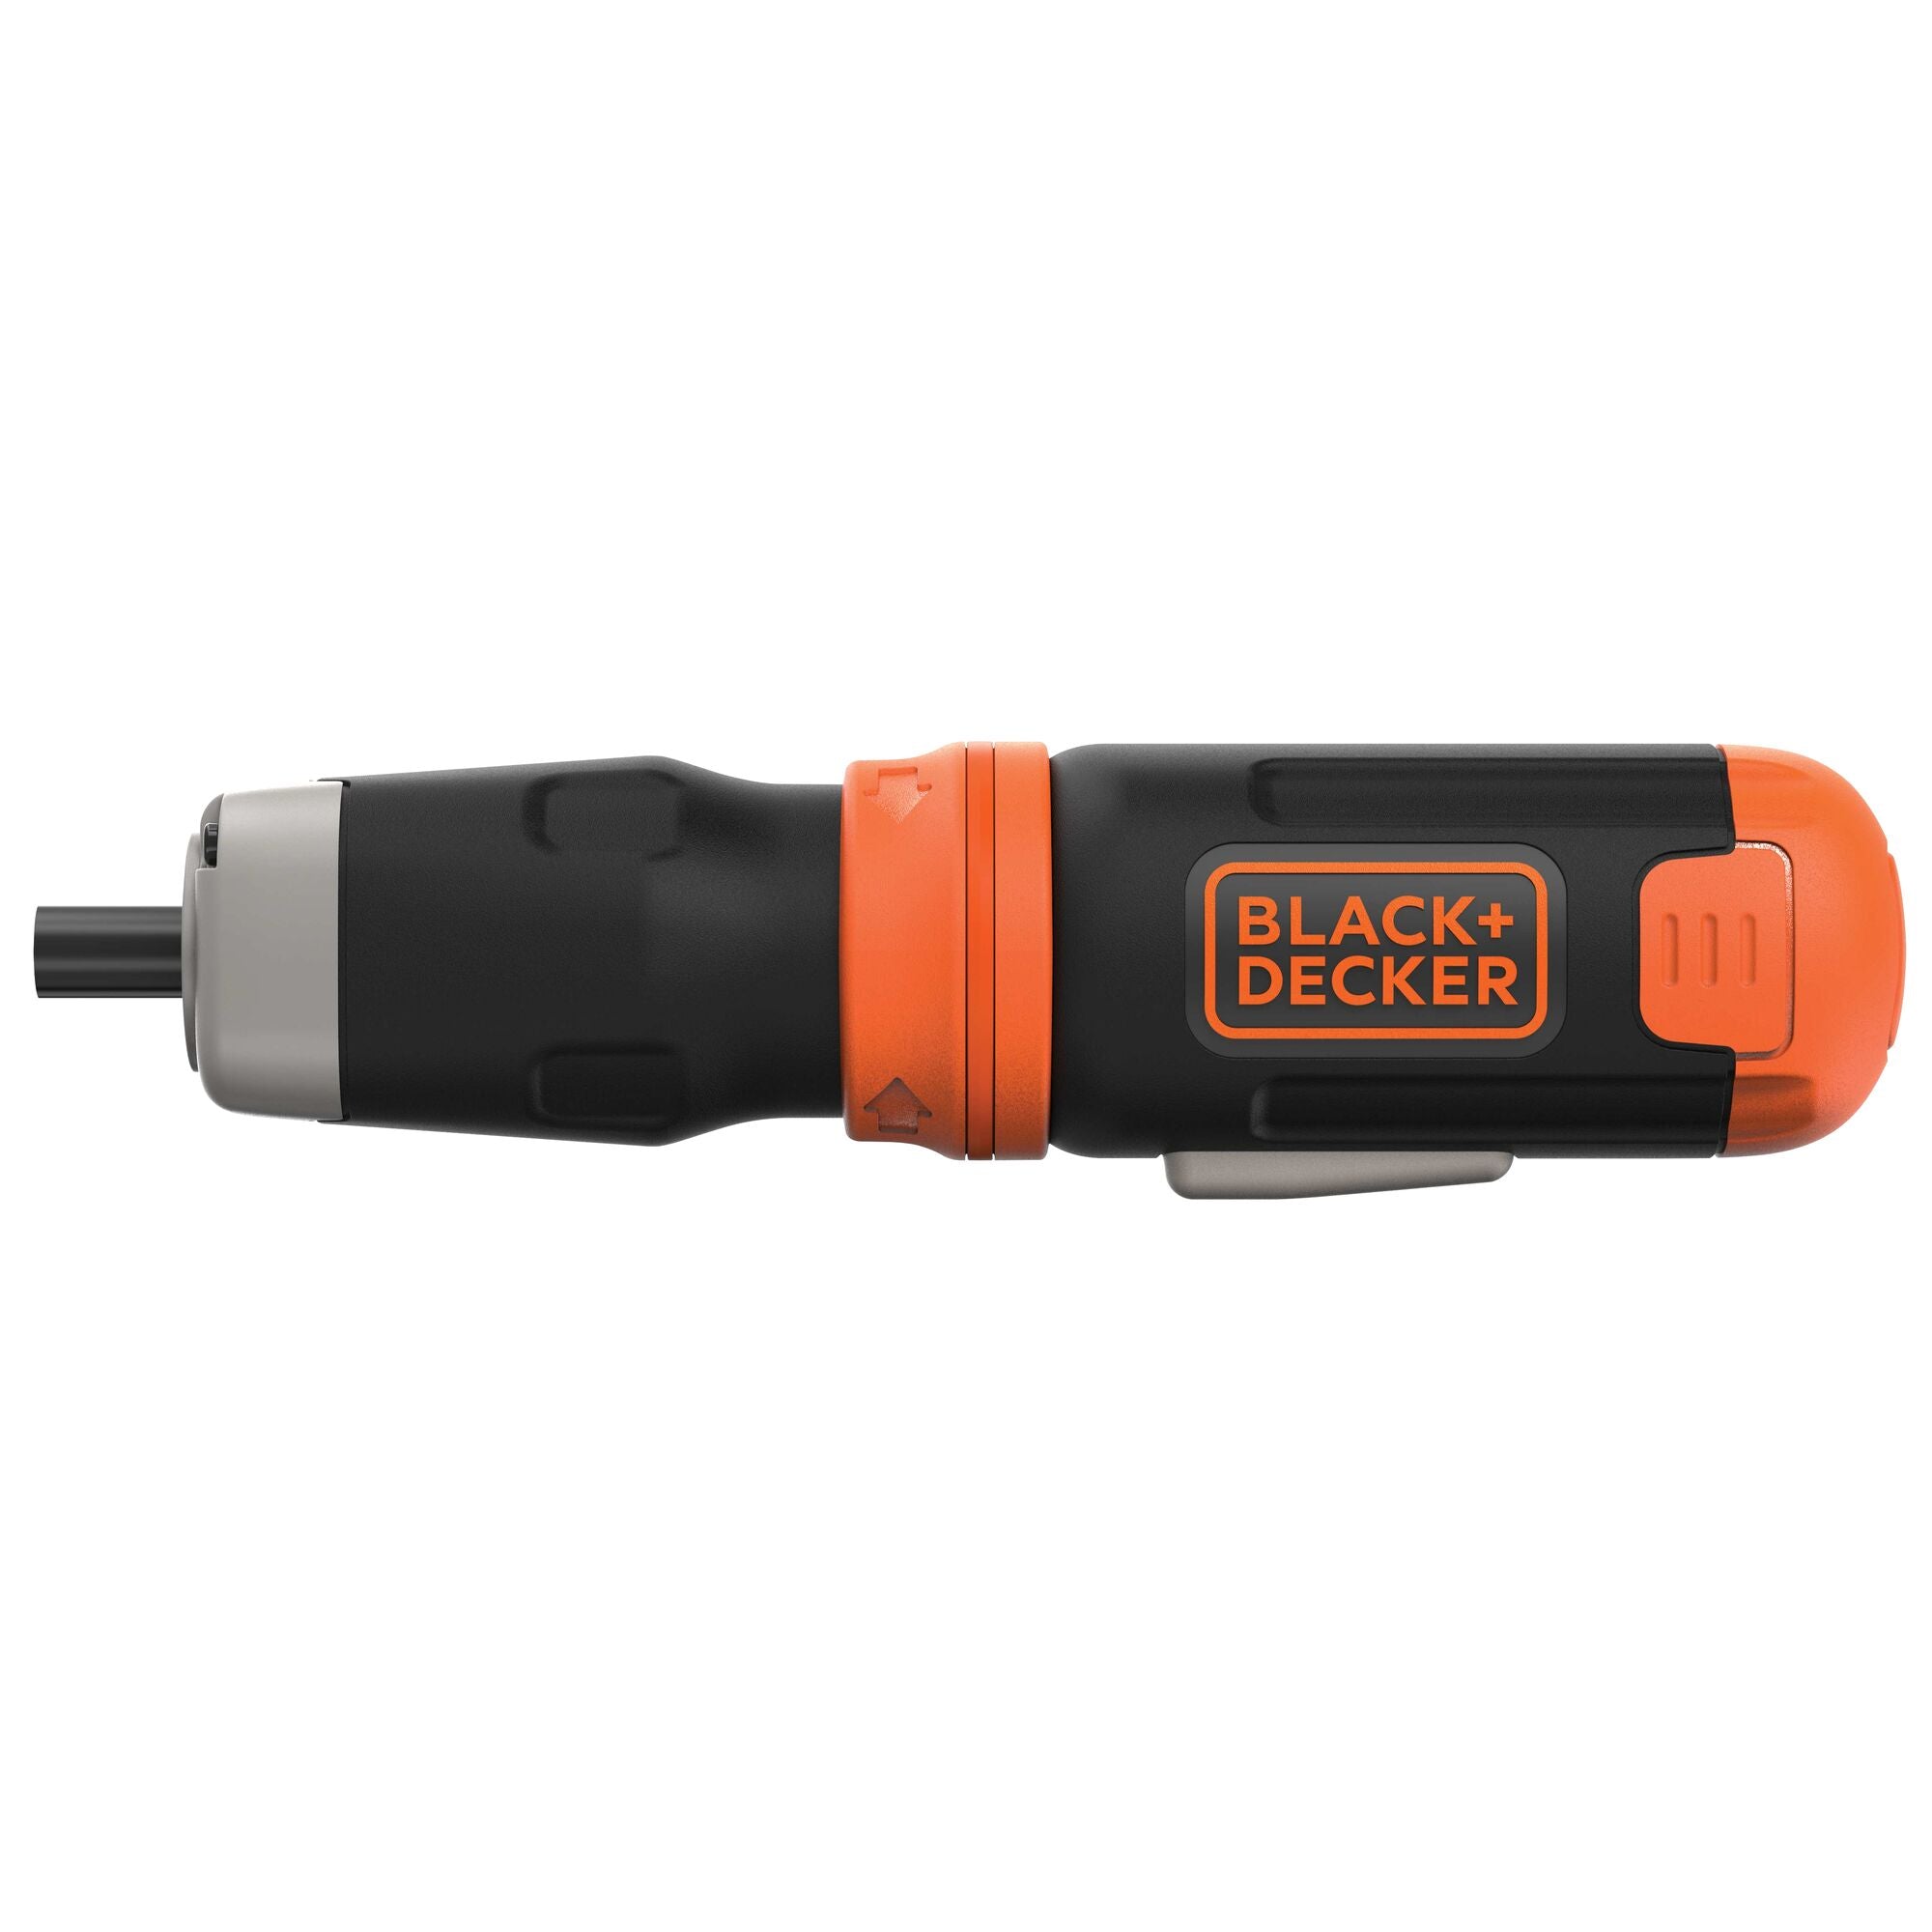  BLACK+DECKER Cordless Screwdriver, Alkaline (BCF601AA), 6 x 1 x  8 inches : Everything Else